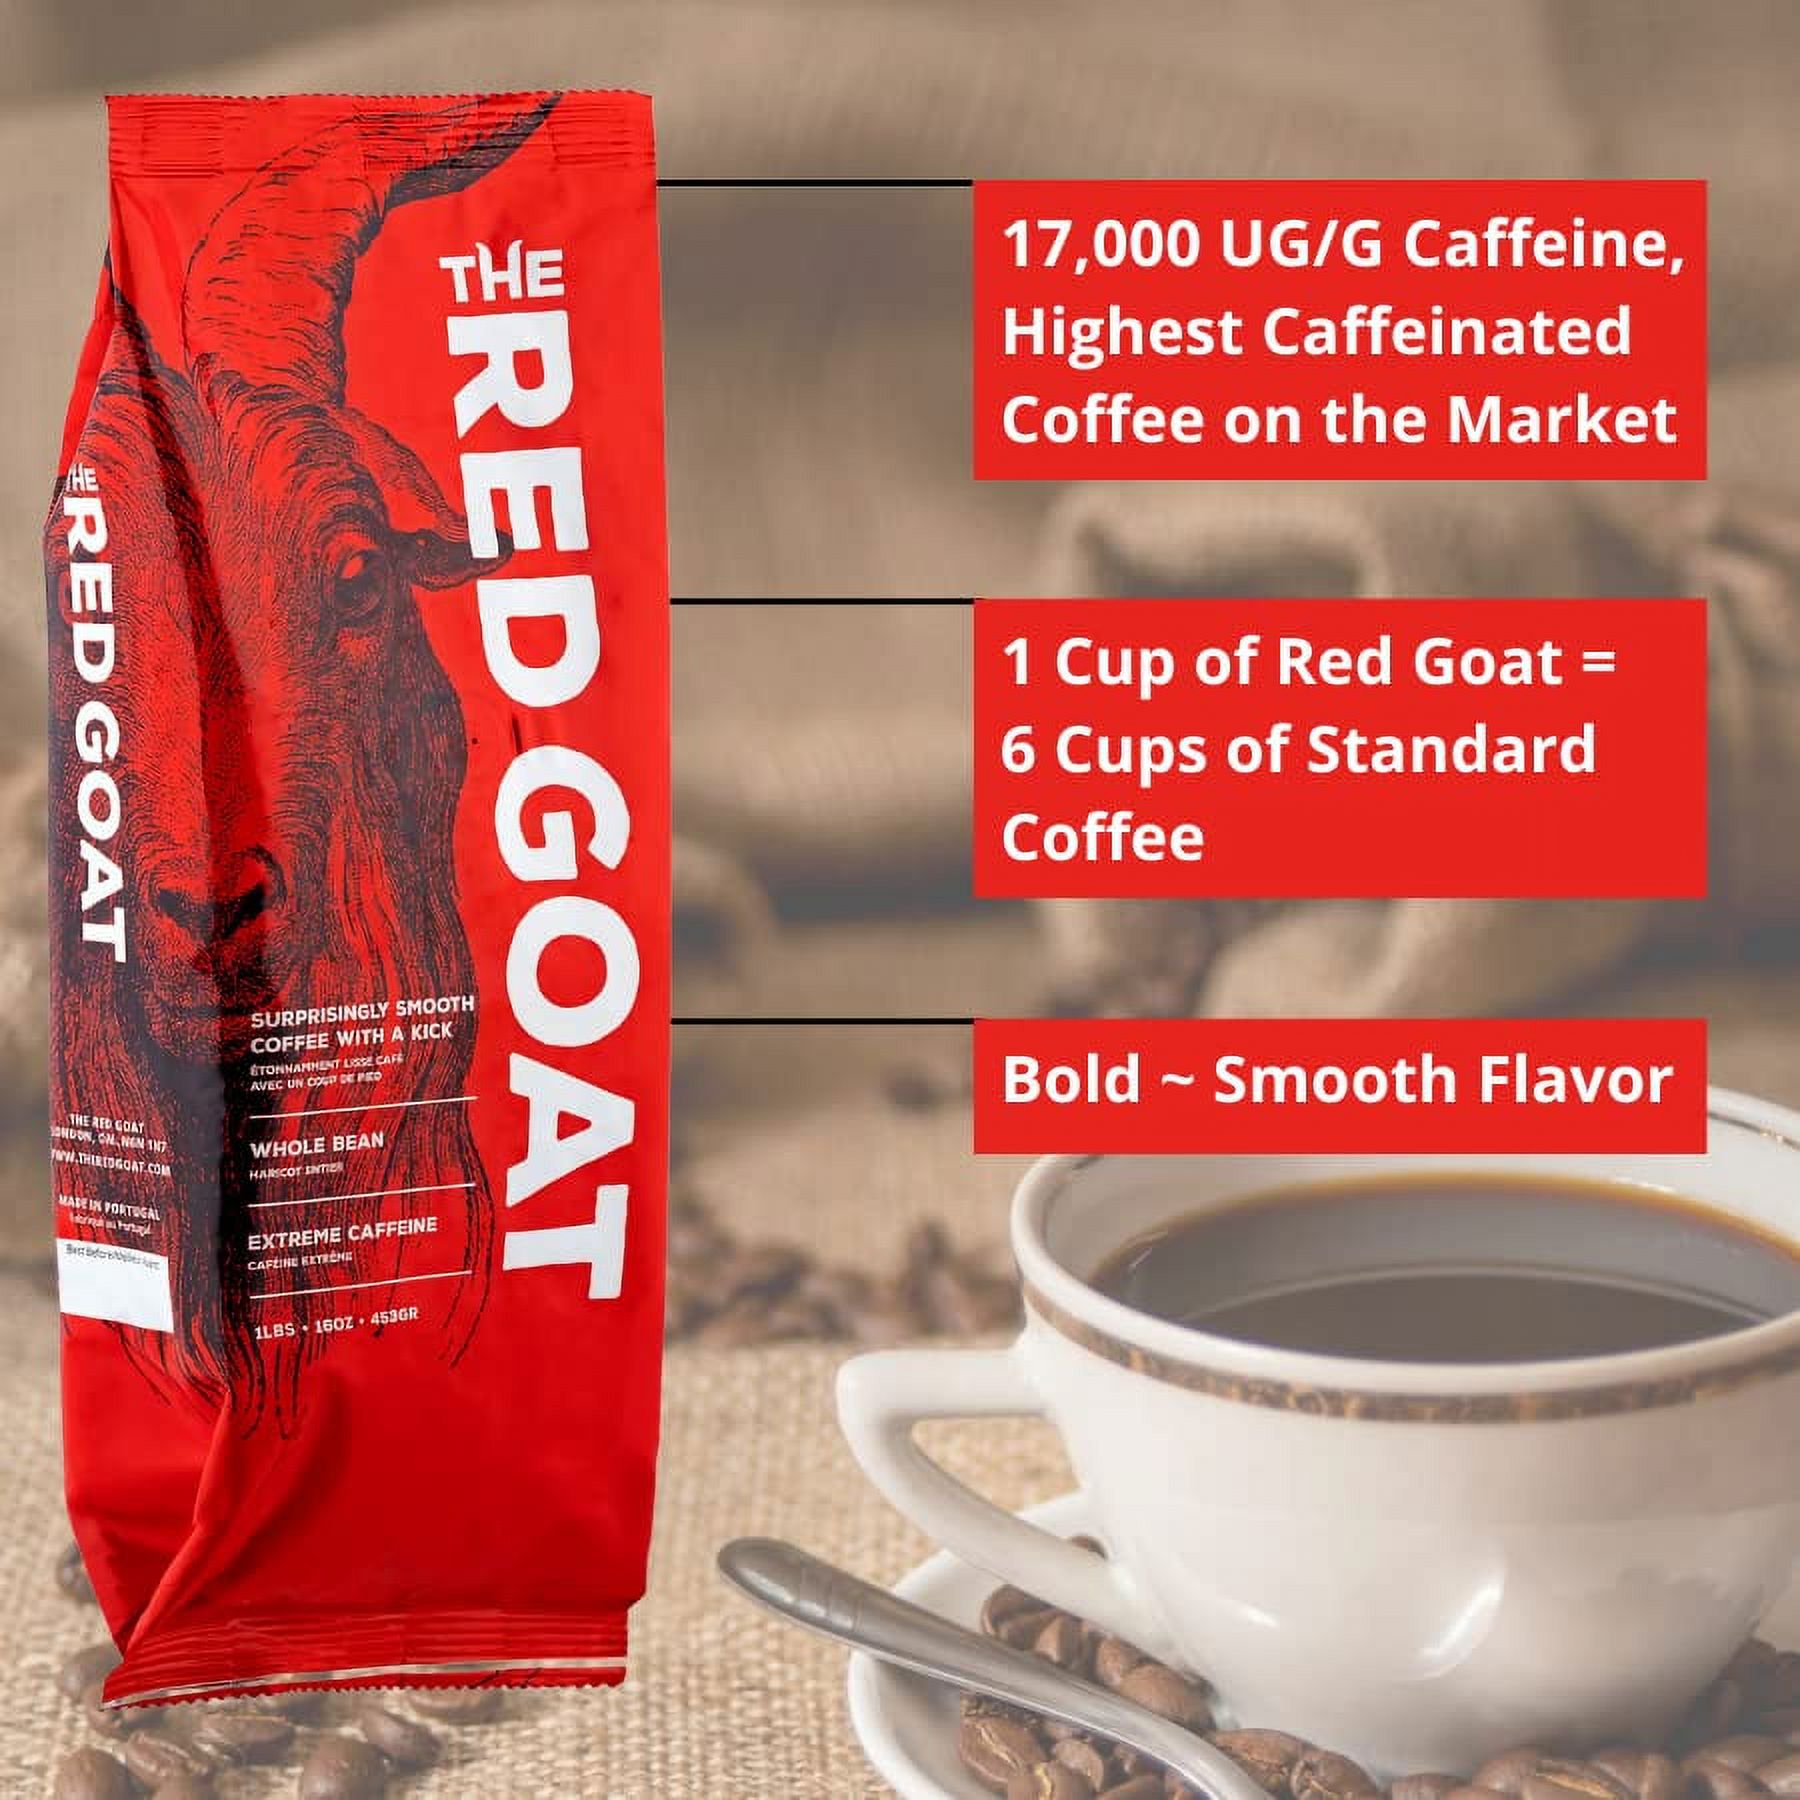 The Red Goat Coffee, Original Strong Ground Coffee, 1lb. - image 2 of 3